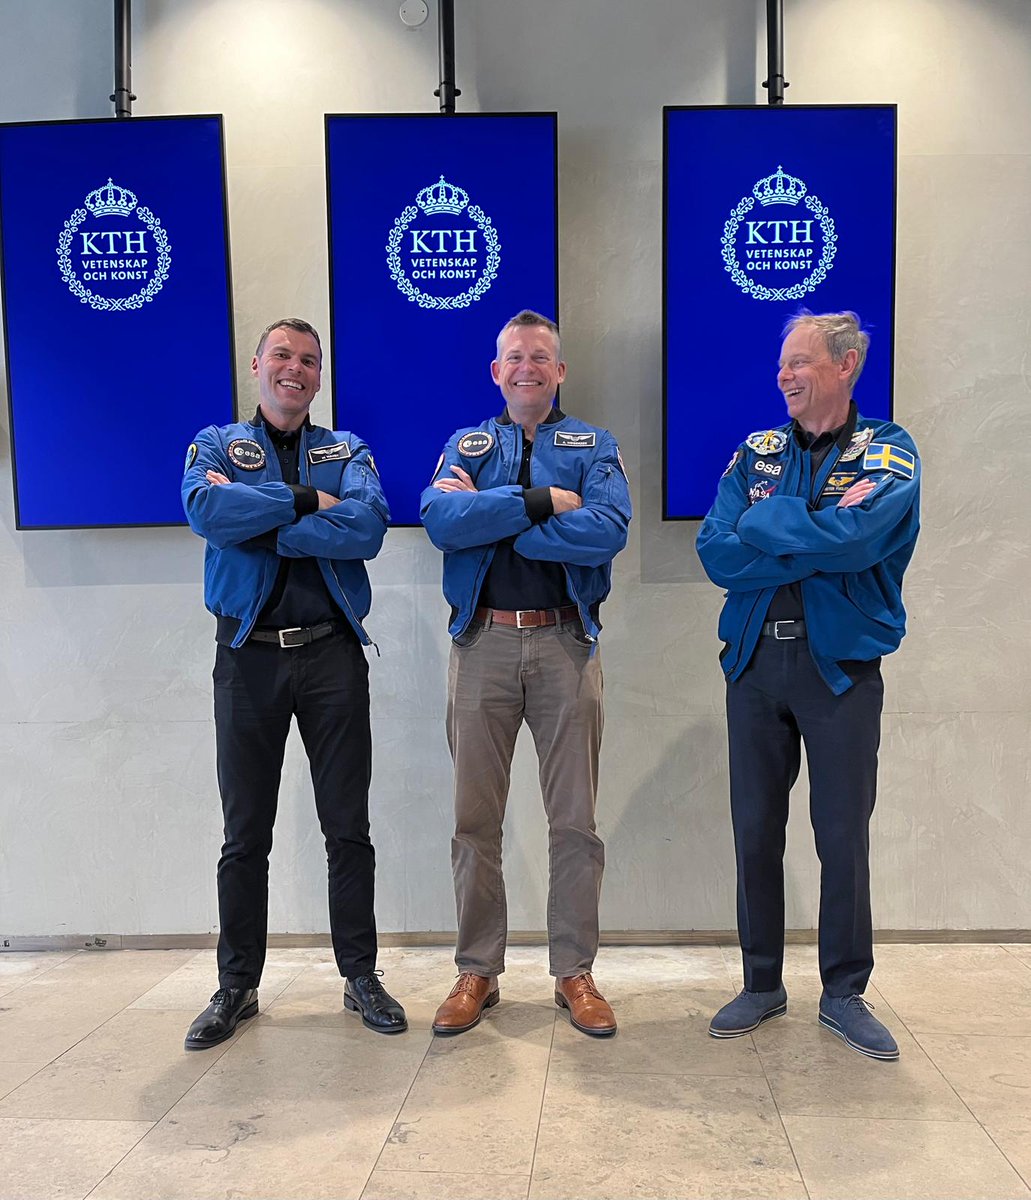 Three astronauts, three @esa generations, one picture. 👨‍🚀👨‍🚀👨‍🚀 @astro_marcus, @Astro_Andreas and @CFuglesang came together before meeting the kings and queens of Sweden and Denmark in Stockholm yesterday. 🇸🇪🇩🇰 The astronauts discussed how space research and technology can help…